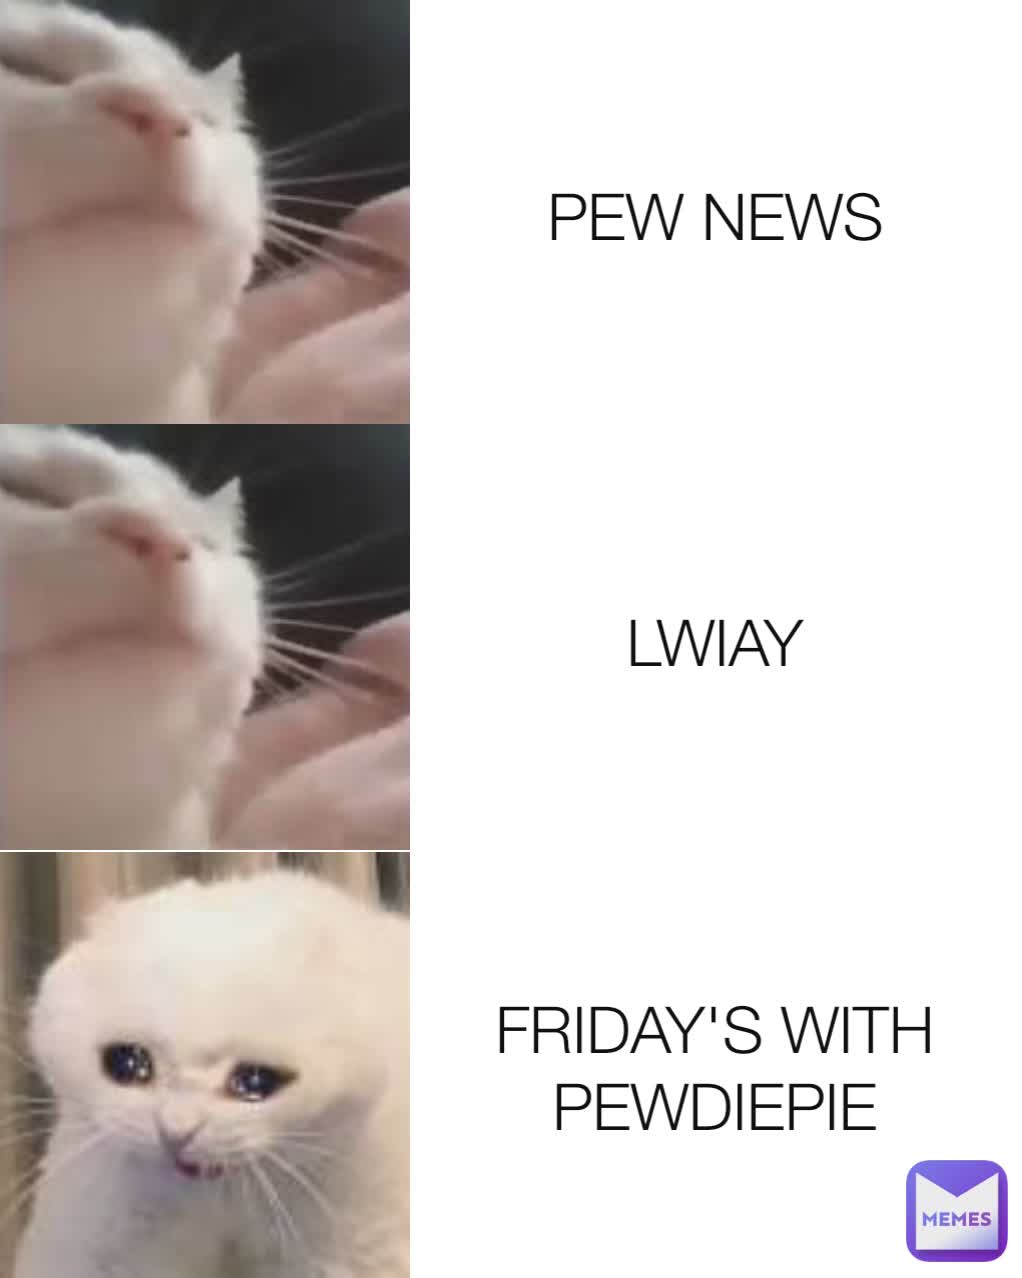 LWIAY PEW NEWS FRIDAY'S WITH PEWDIEPIE